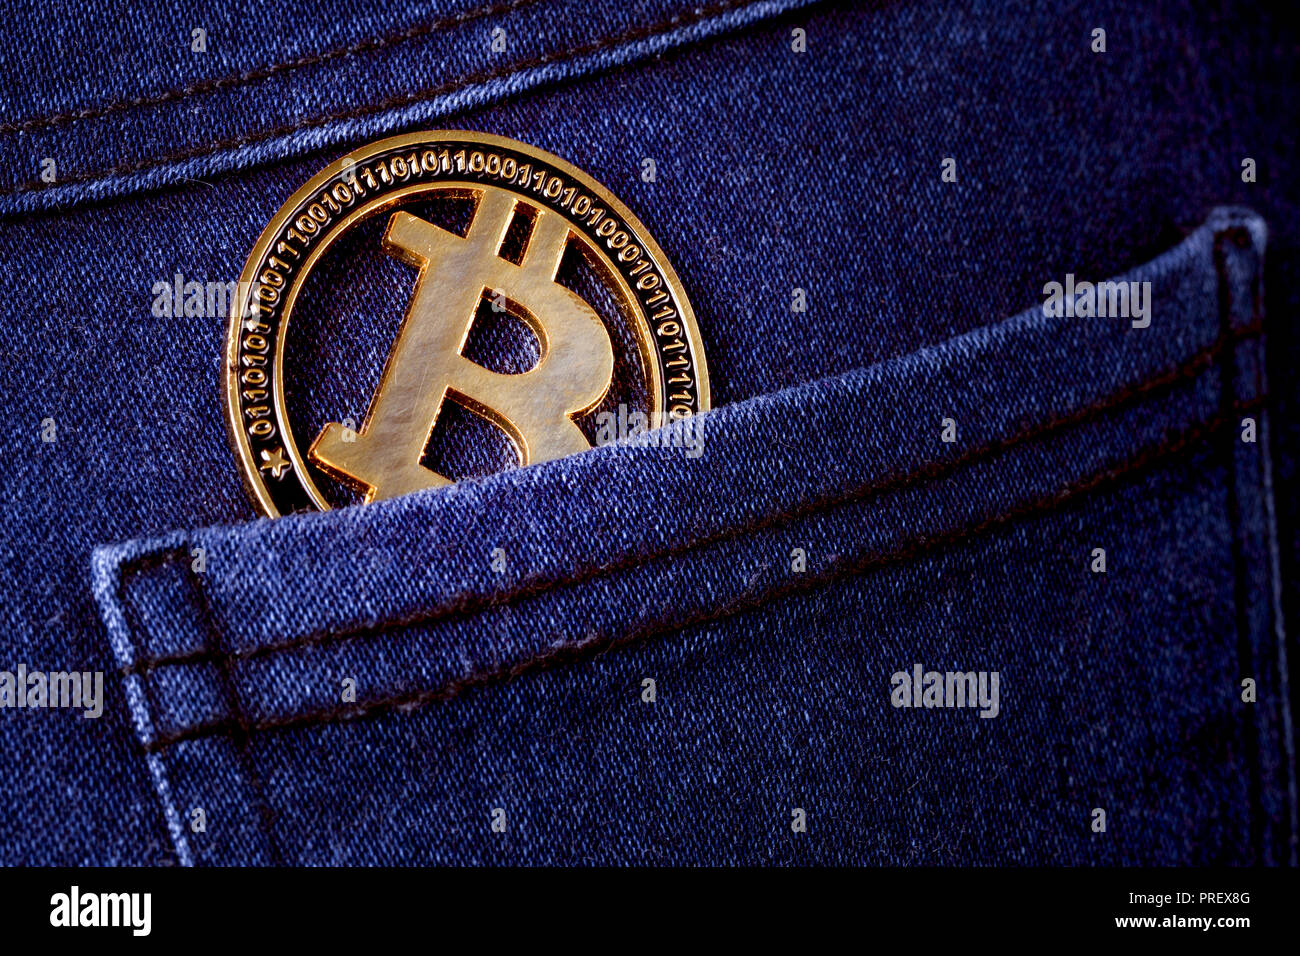 gold bitcoin in the back pocket of jeans, background image Stock Photo